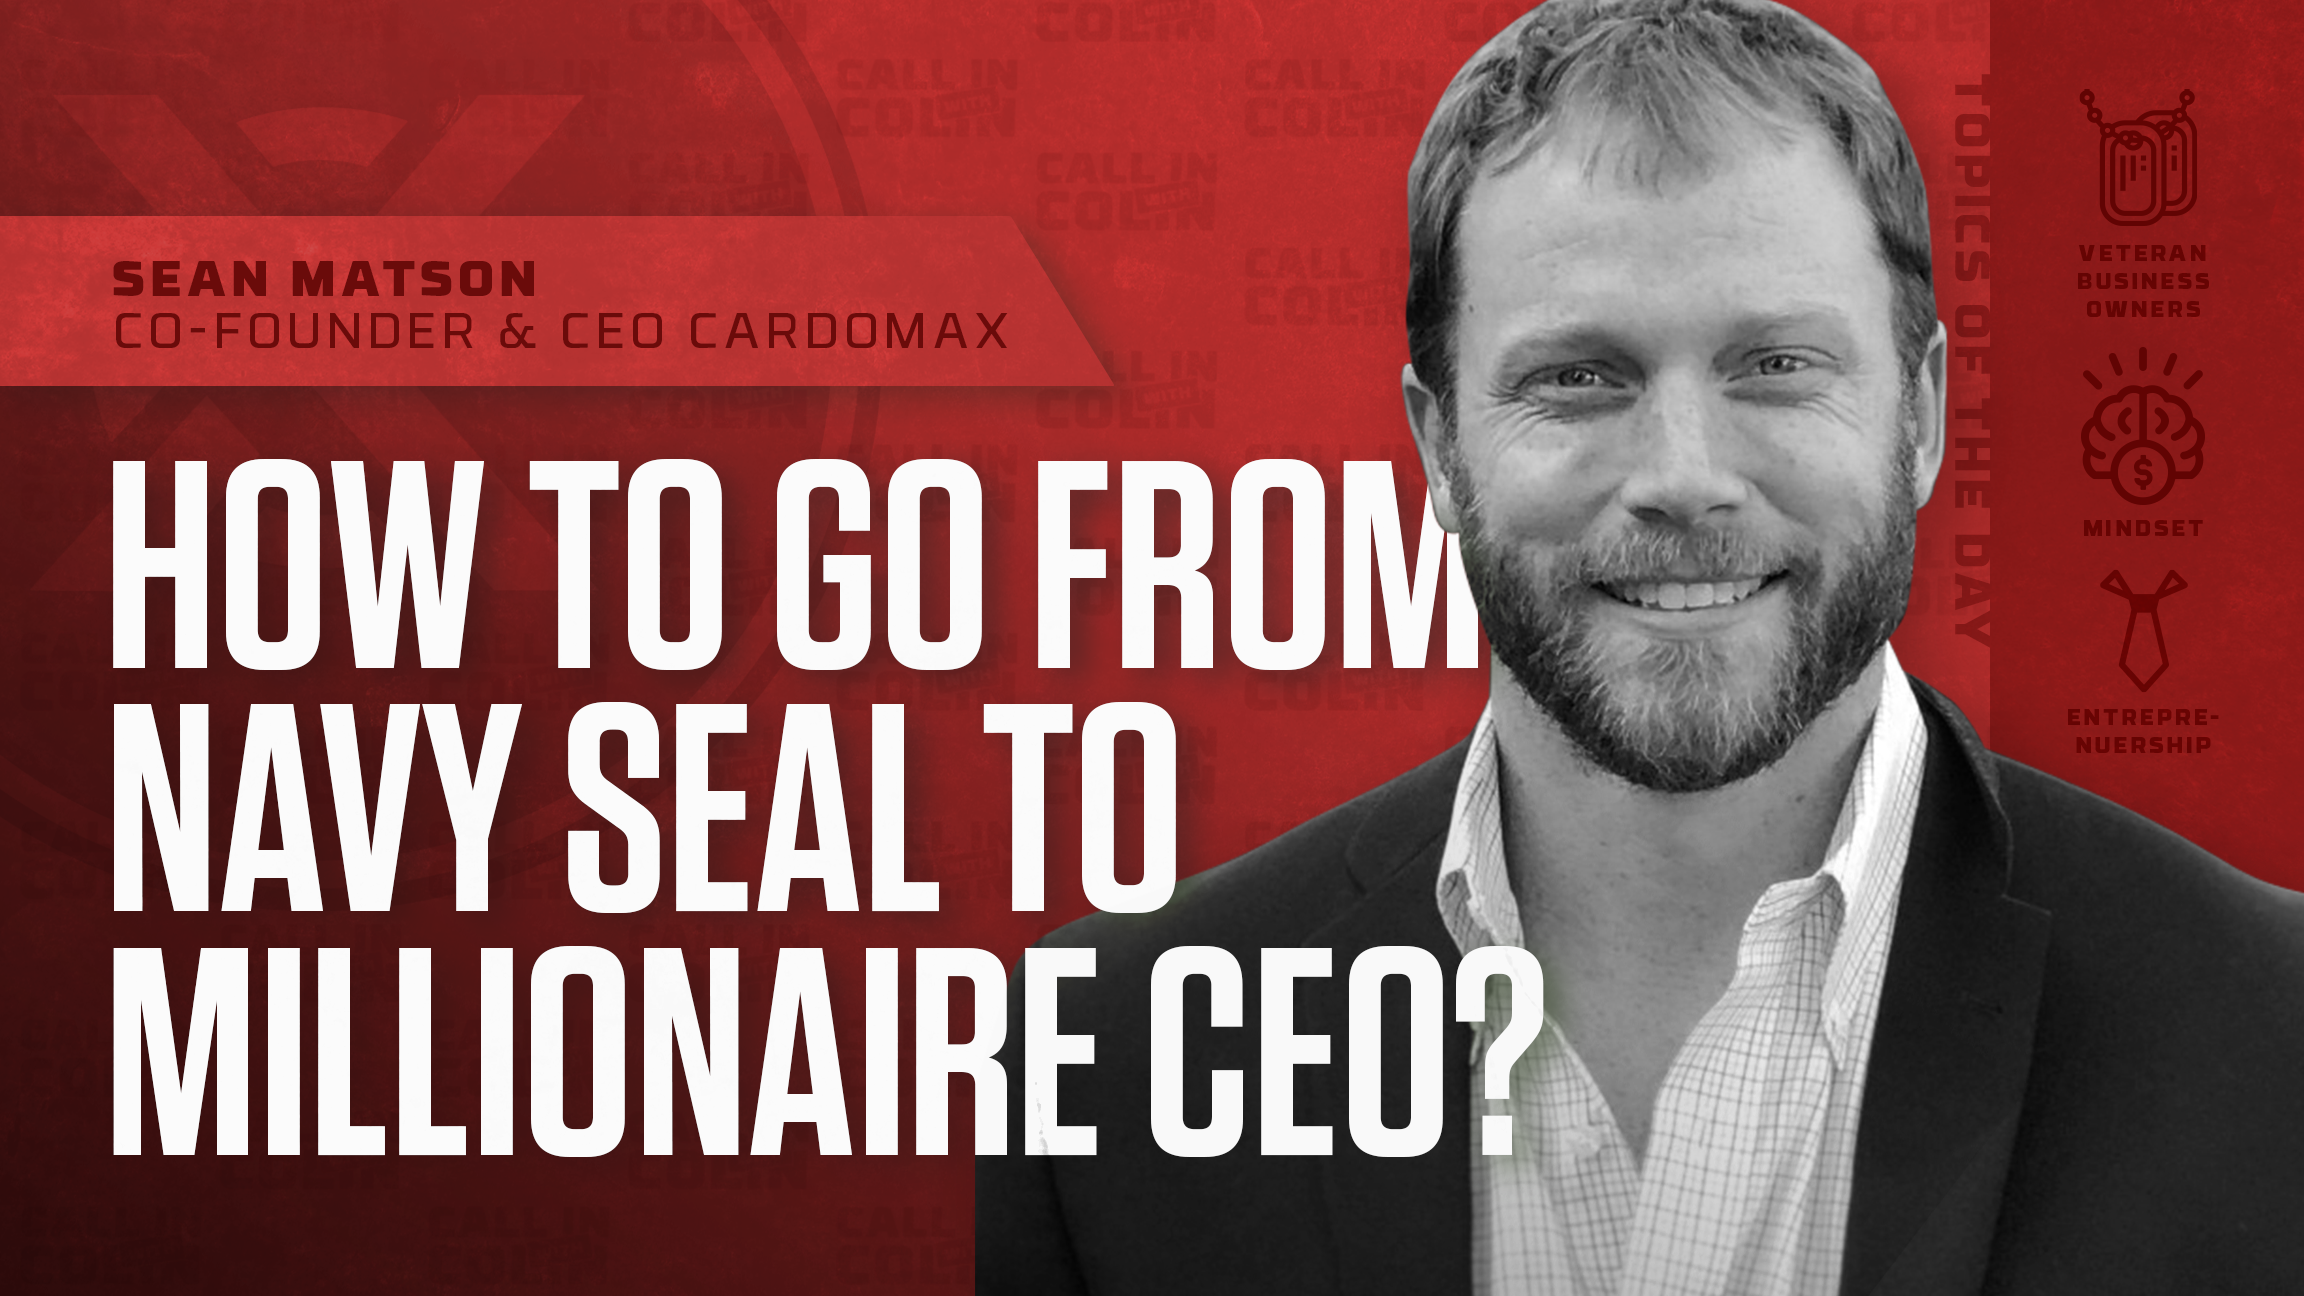 From Navy SEAL Officer to Millionaire CEO